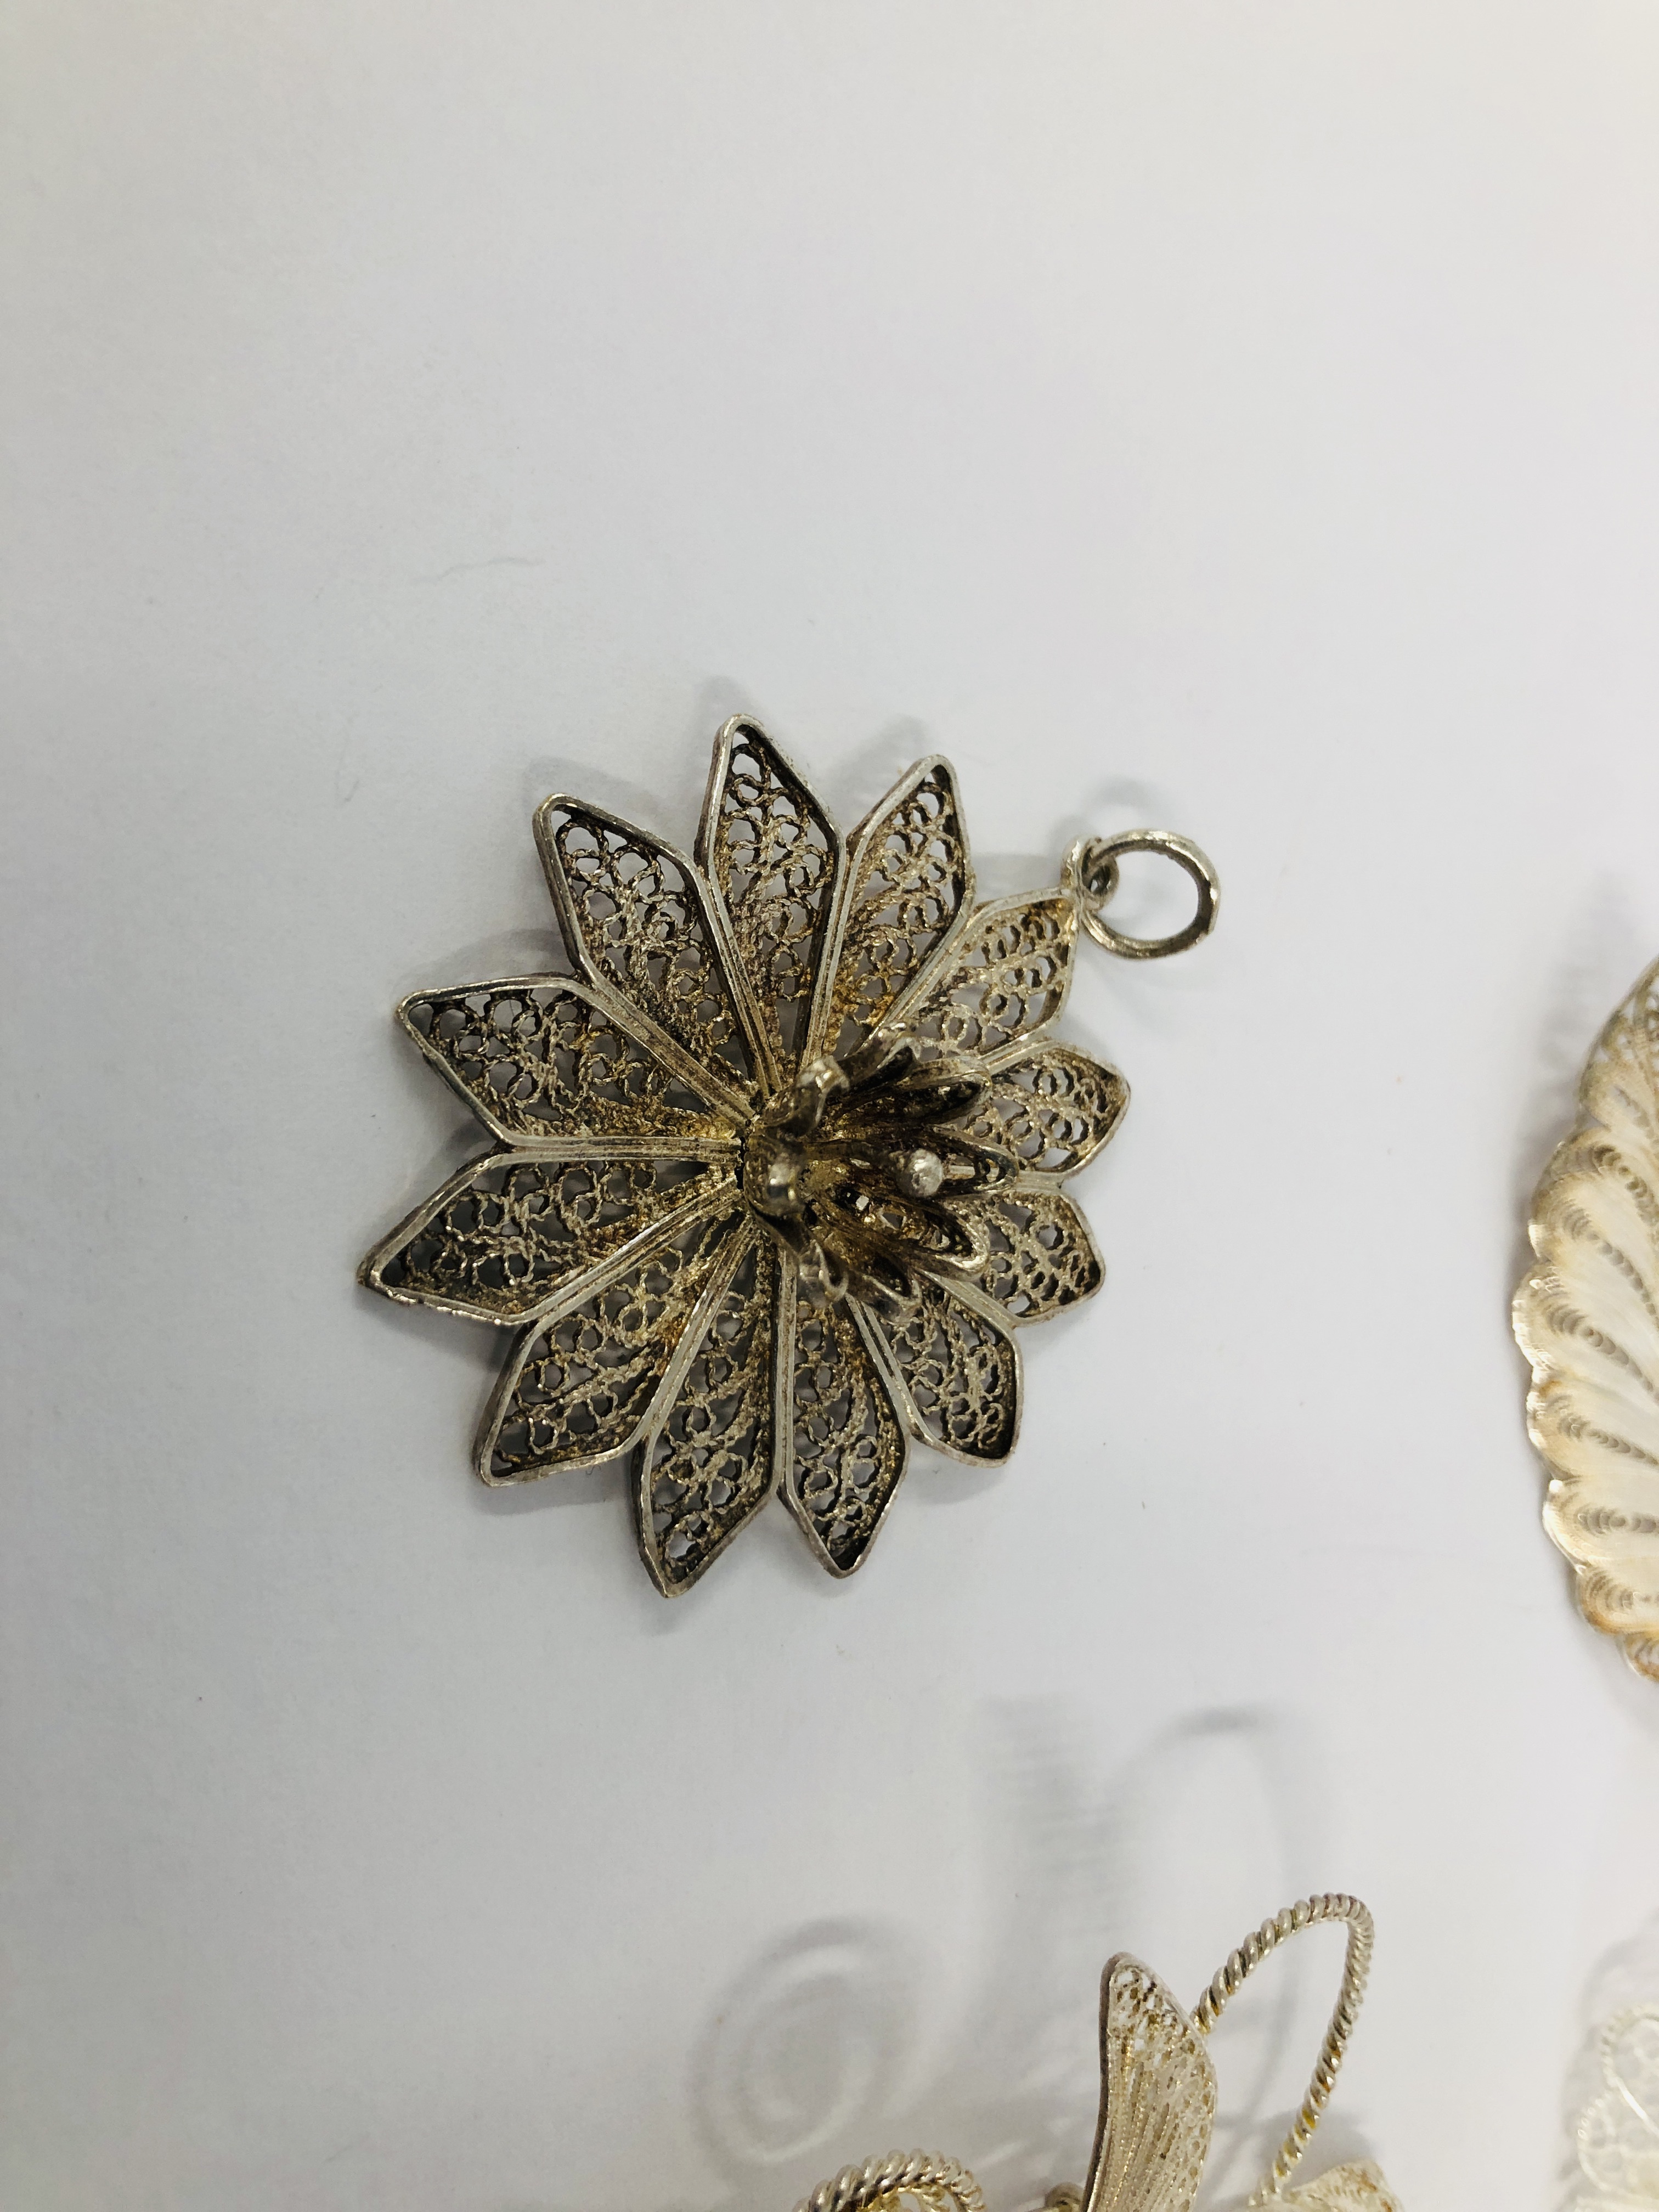 A GROUP OF 6 VINTAGE SILVER AND WHITE METAL FILIGREE BROOCHES. - Image 7 of 8